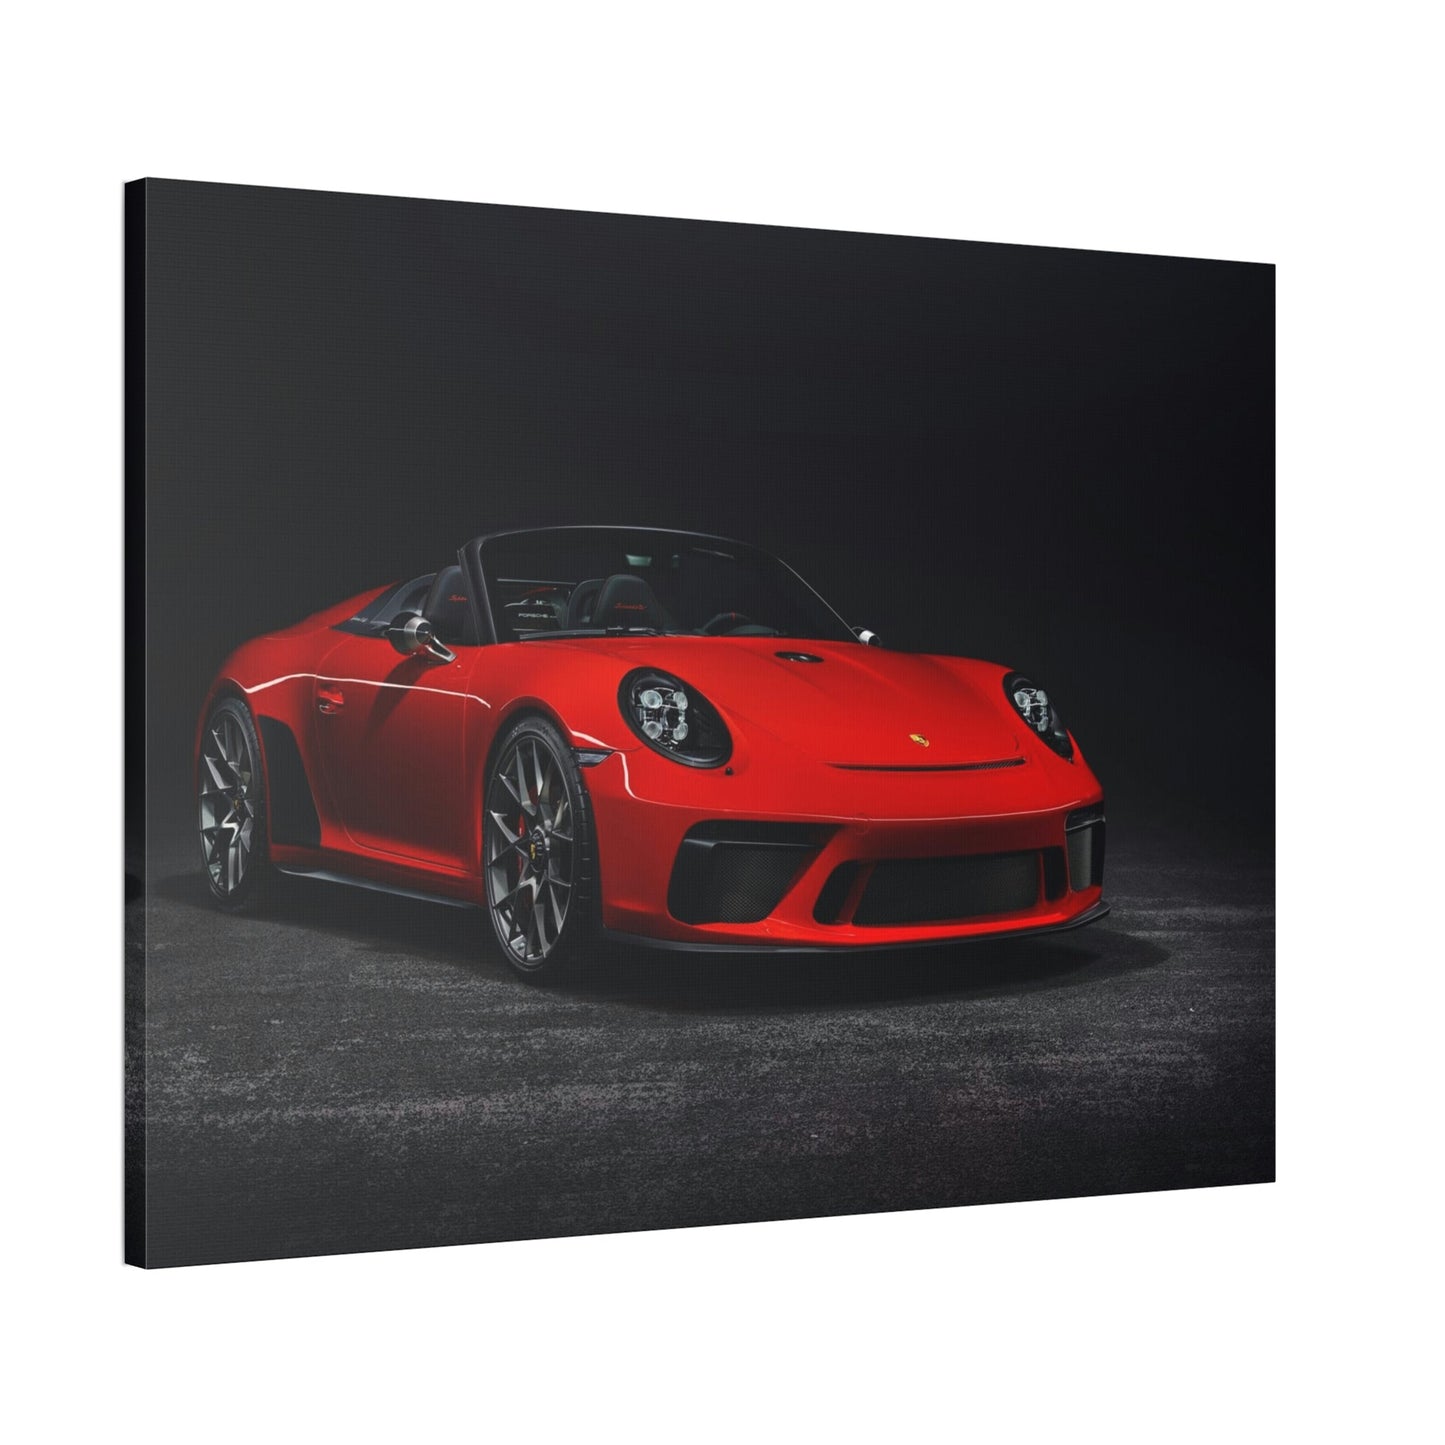 A Classic in the Making: The Timeless Appeal of a Red Porsche on Canvas & Poster